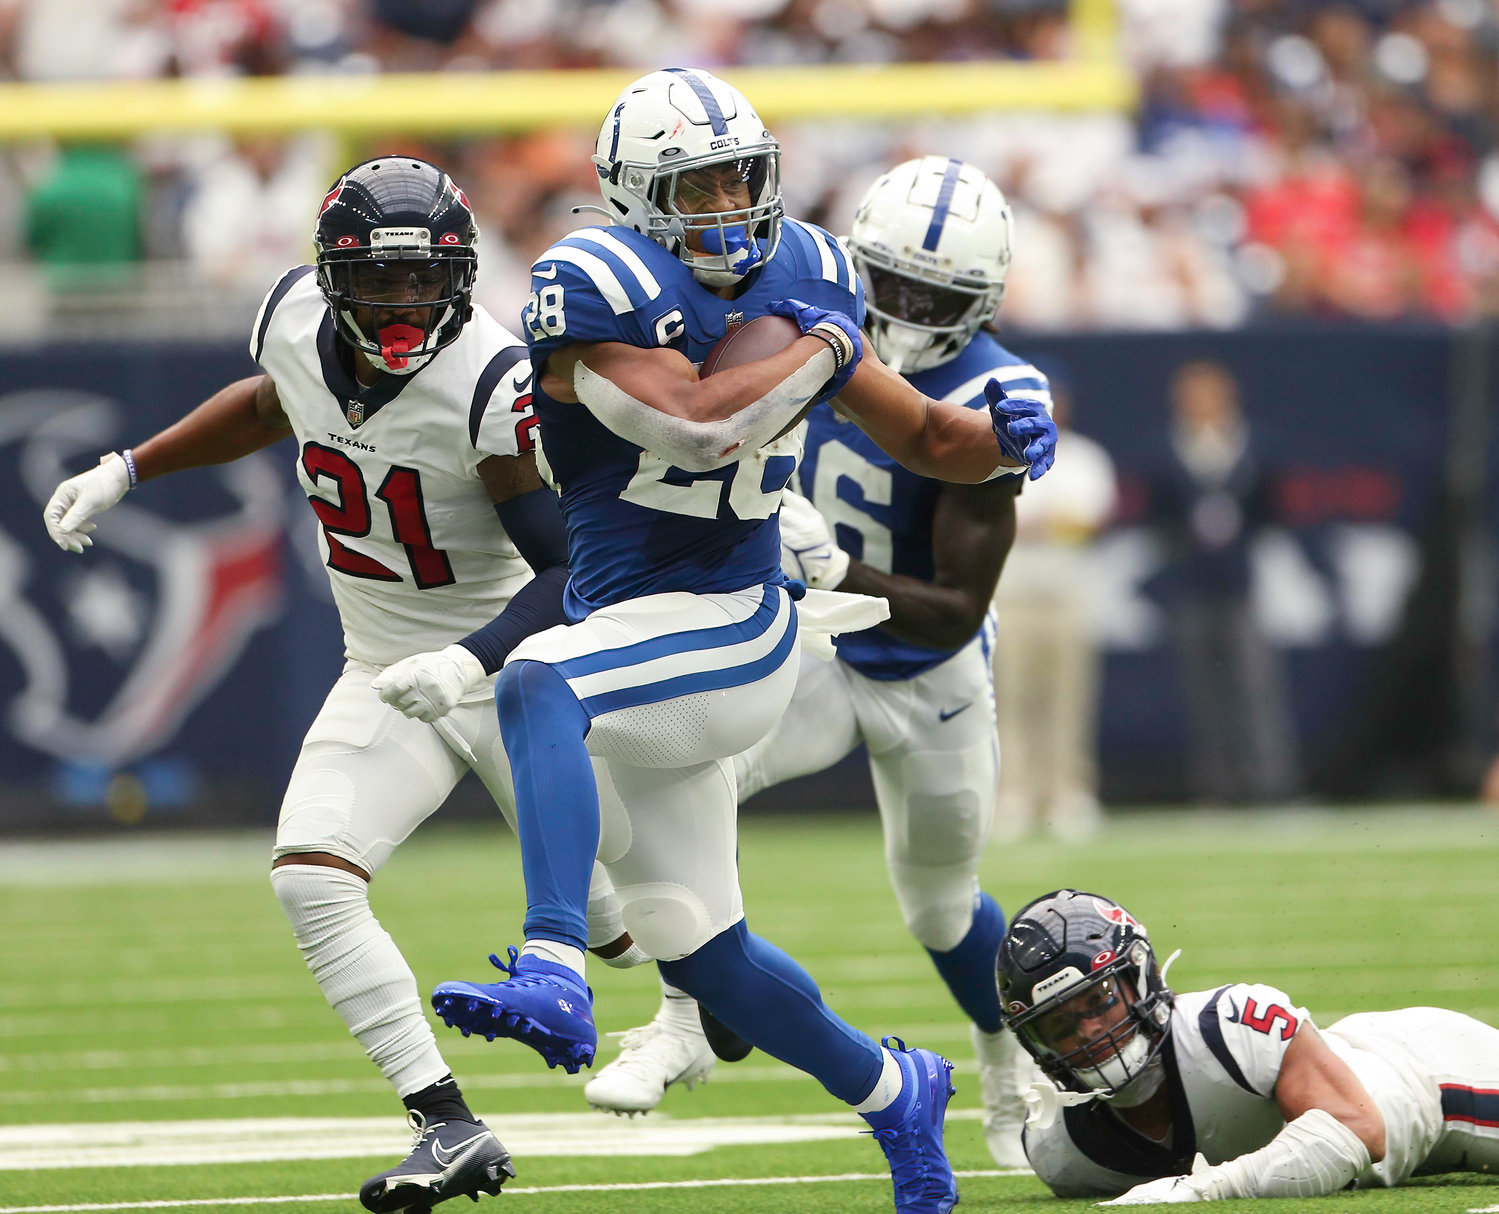 Indianapolis Colts running back Jonathan Taylor (28) carries the ball during an NFL game between the Texans and the Colts on September 11, 2022 in Houston. The game ended in a 20-20 tie after a scoreless overtime period.